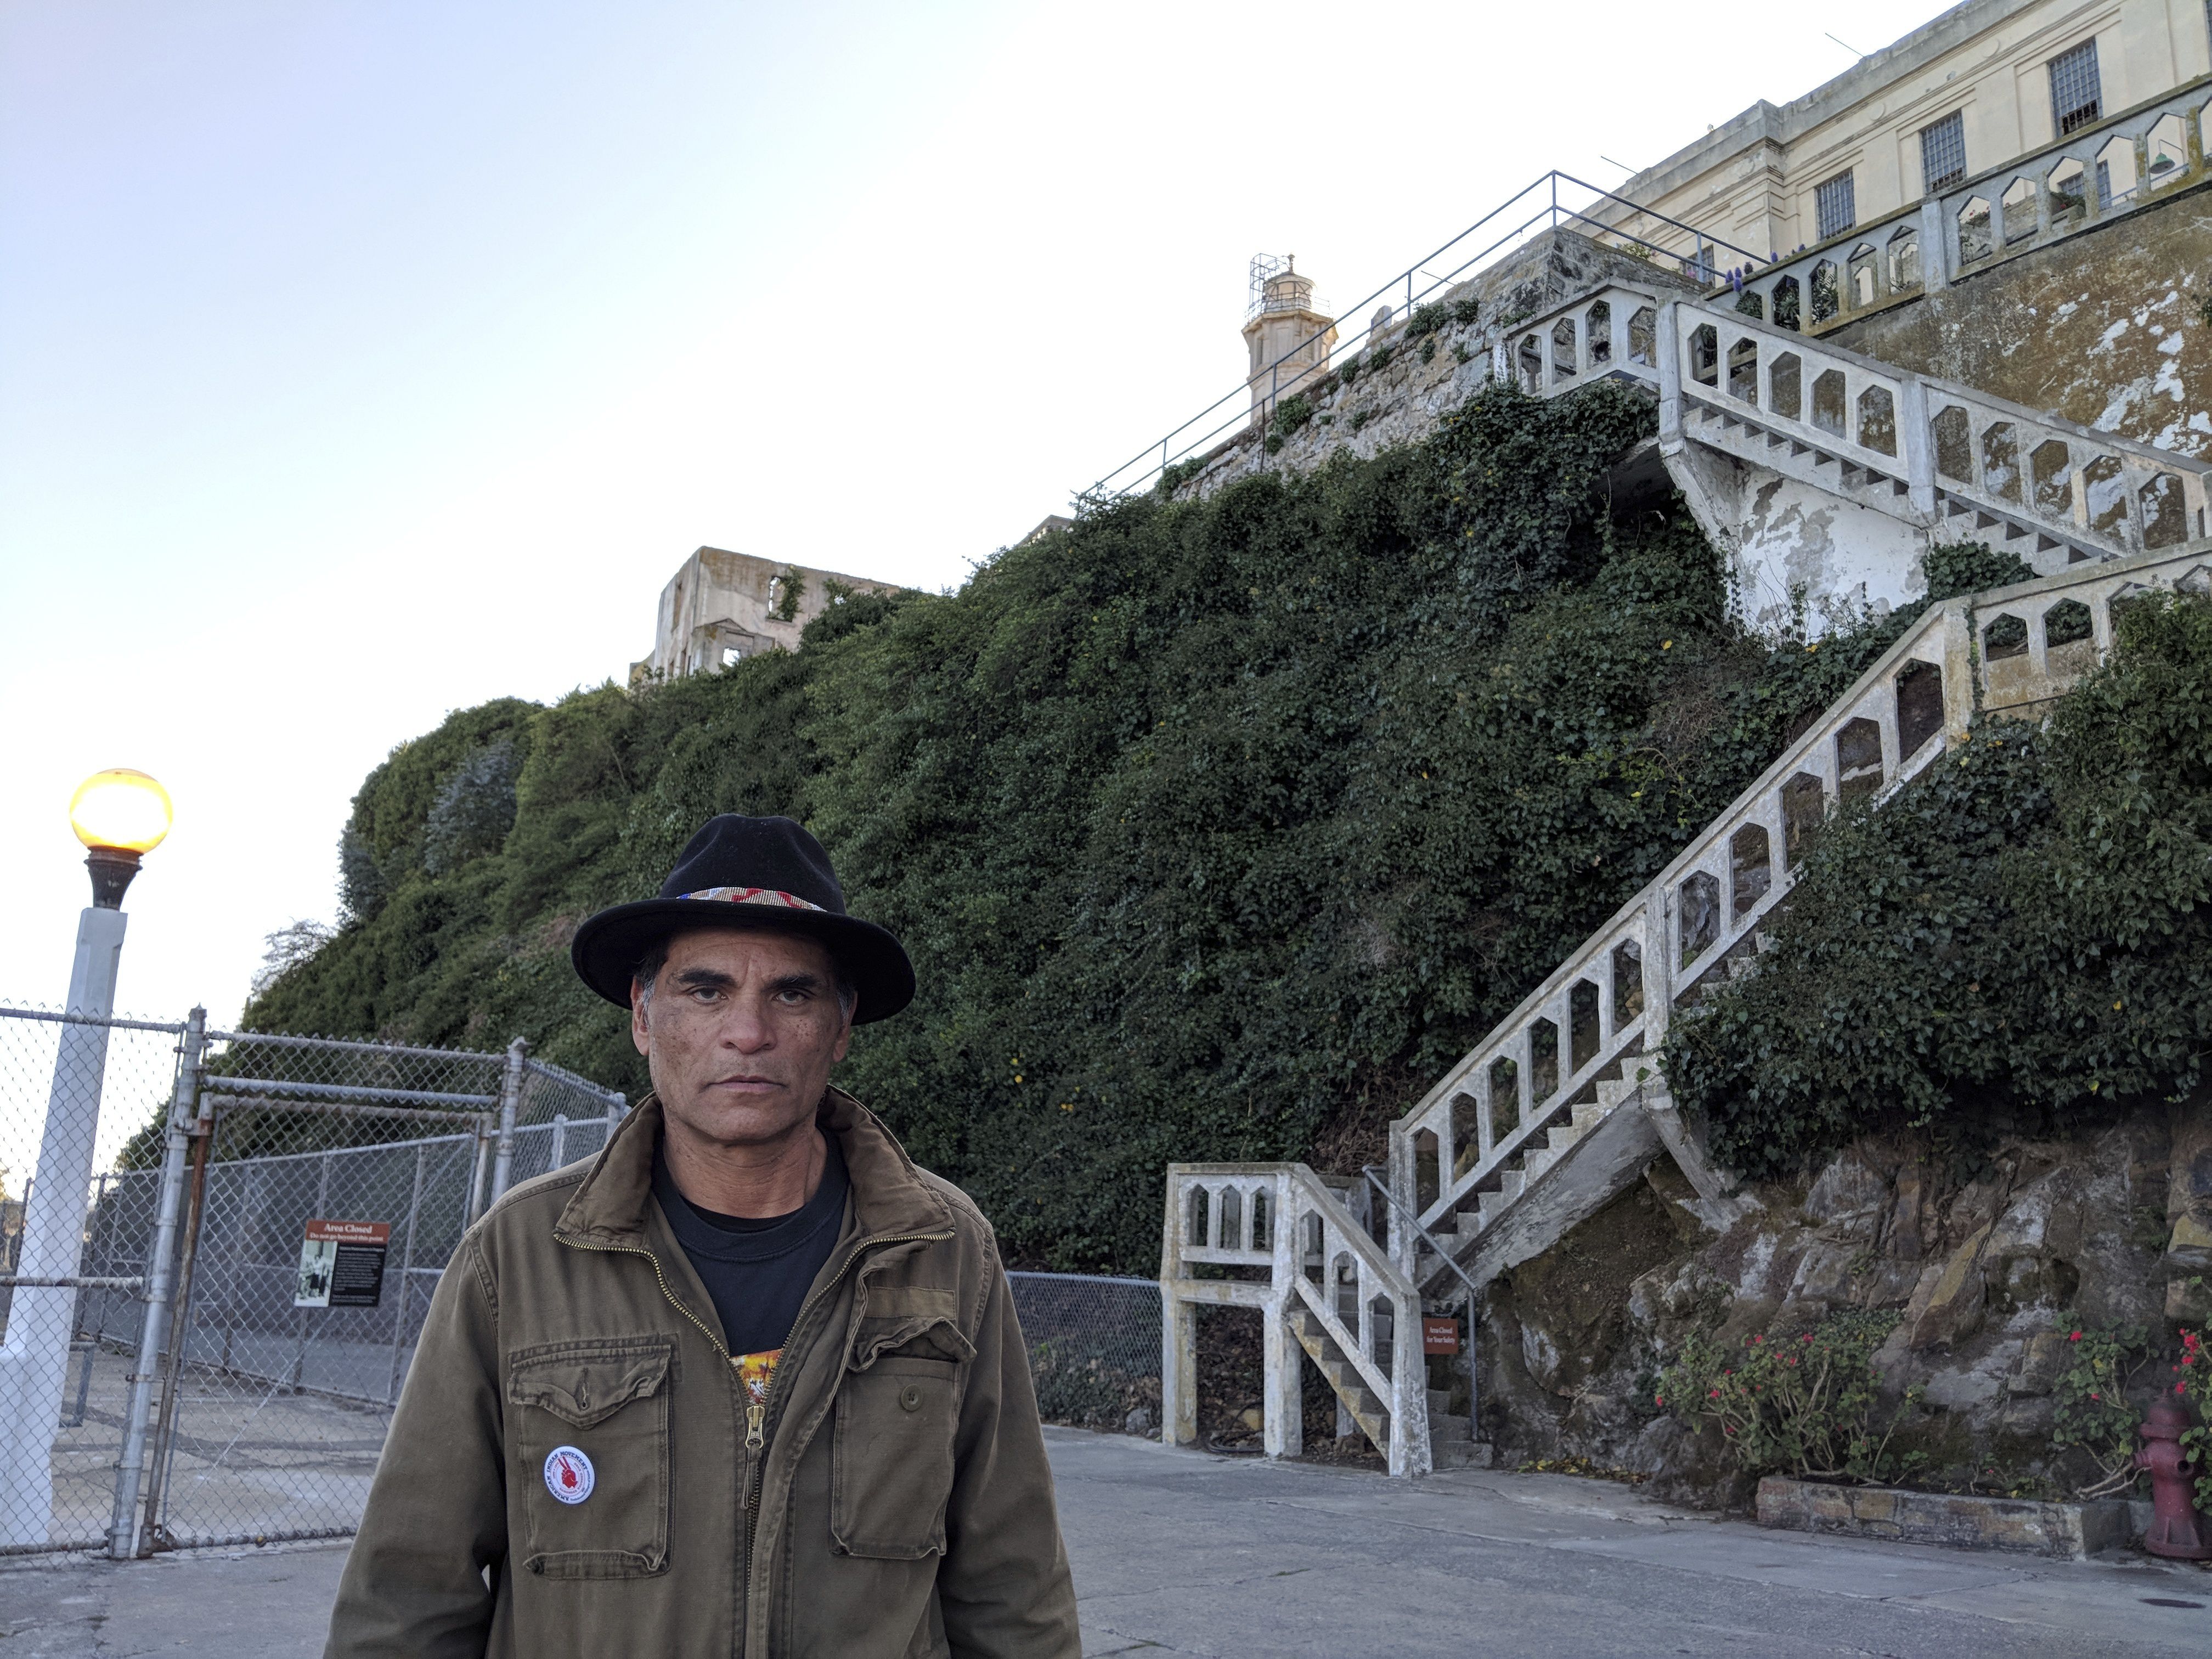 Alcatraz occupation was 'total freedom' for a kid